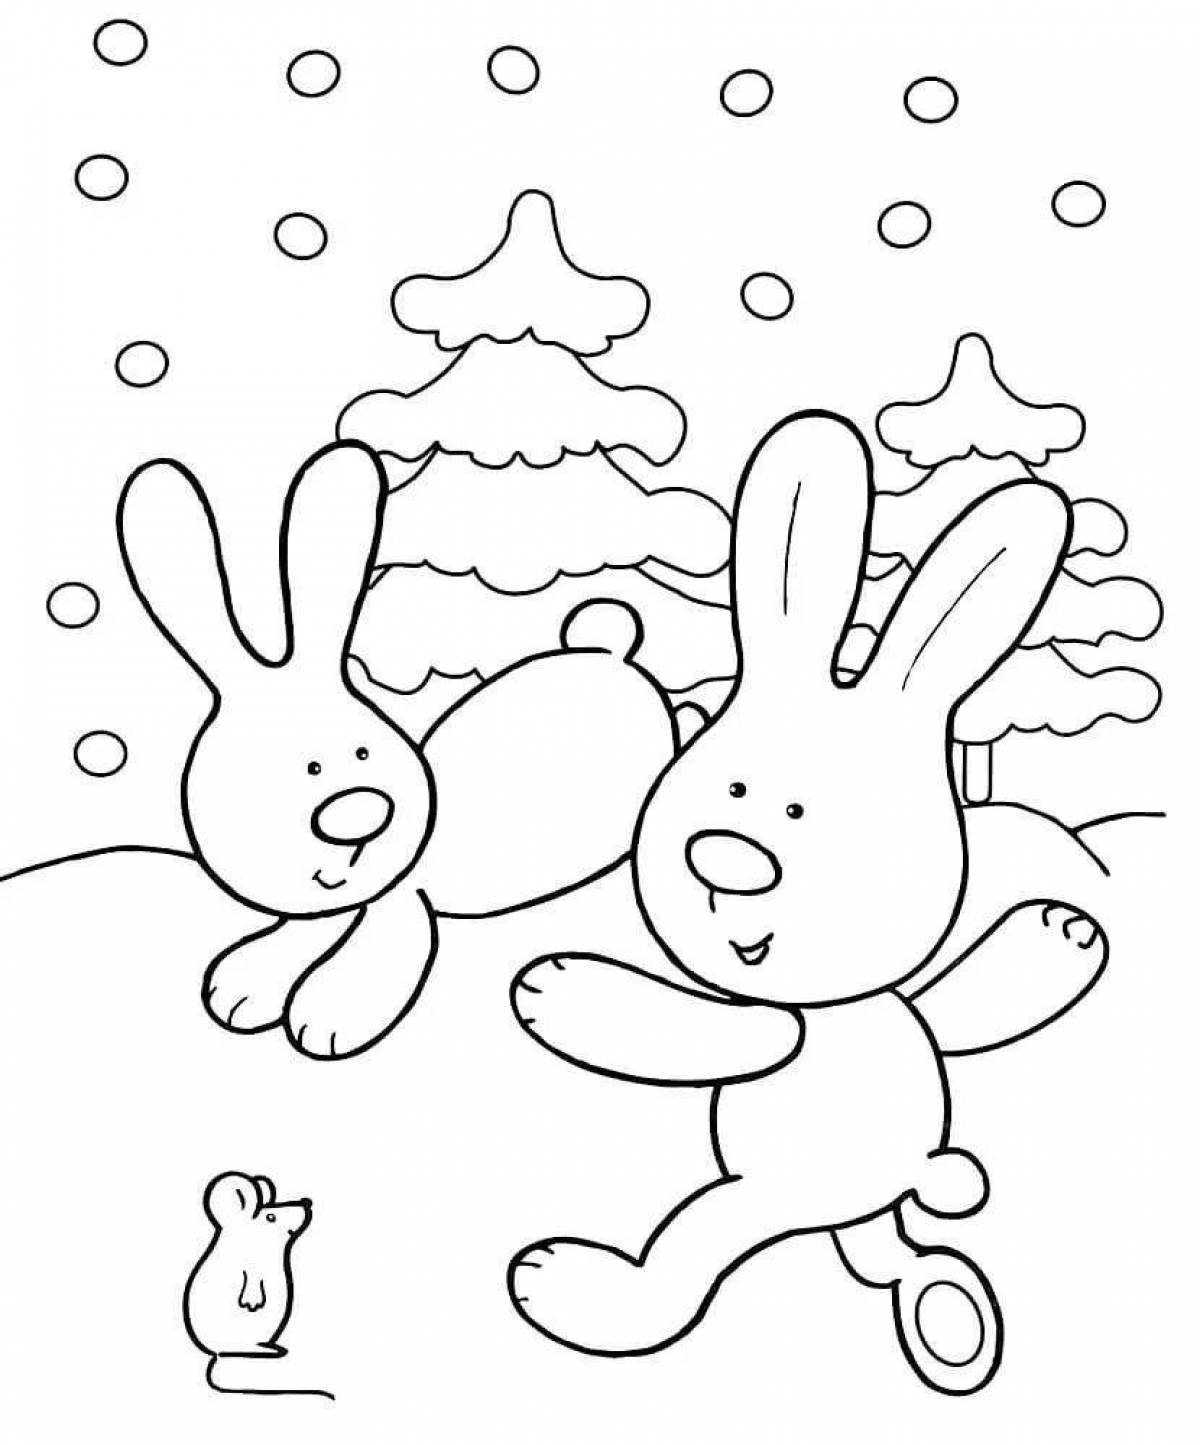 Coloring page cute hare and tree